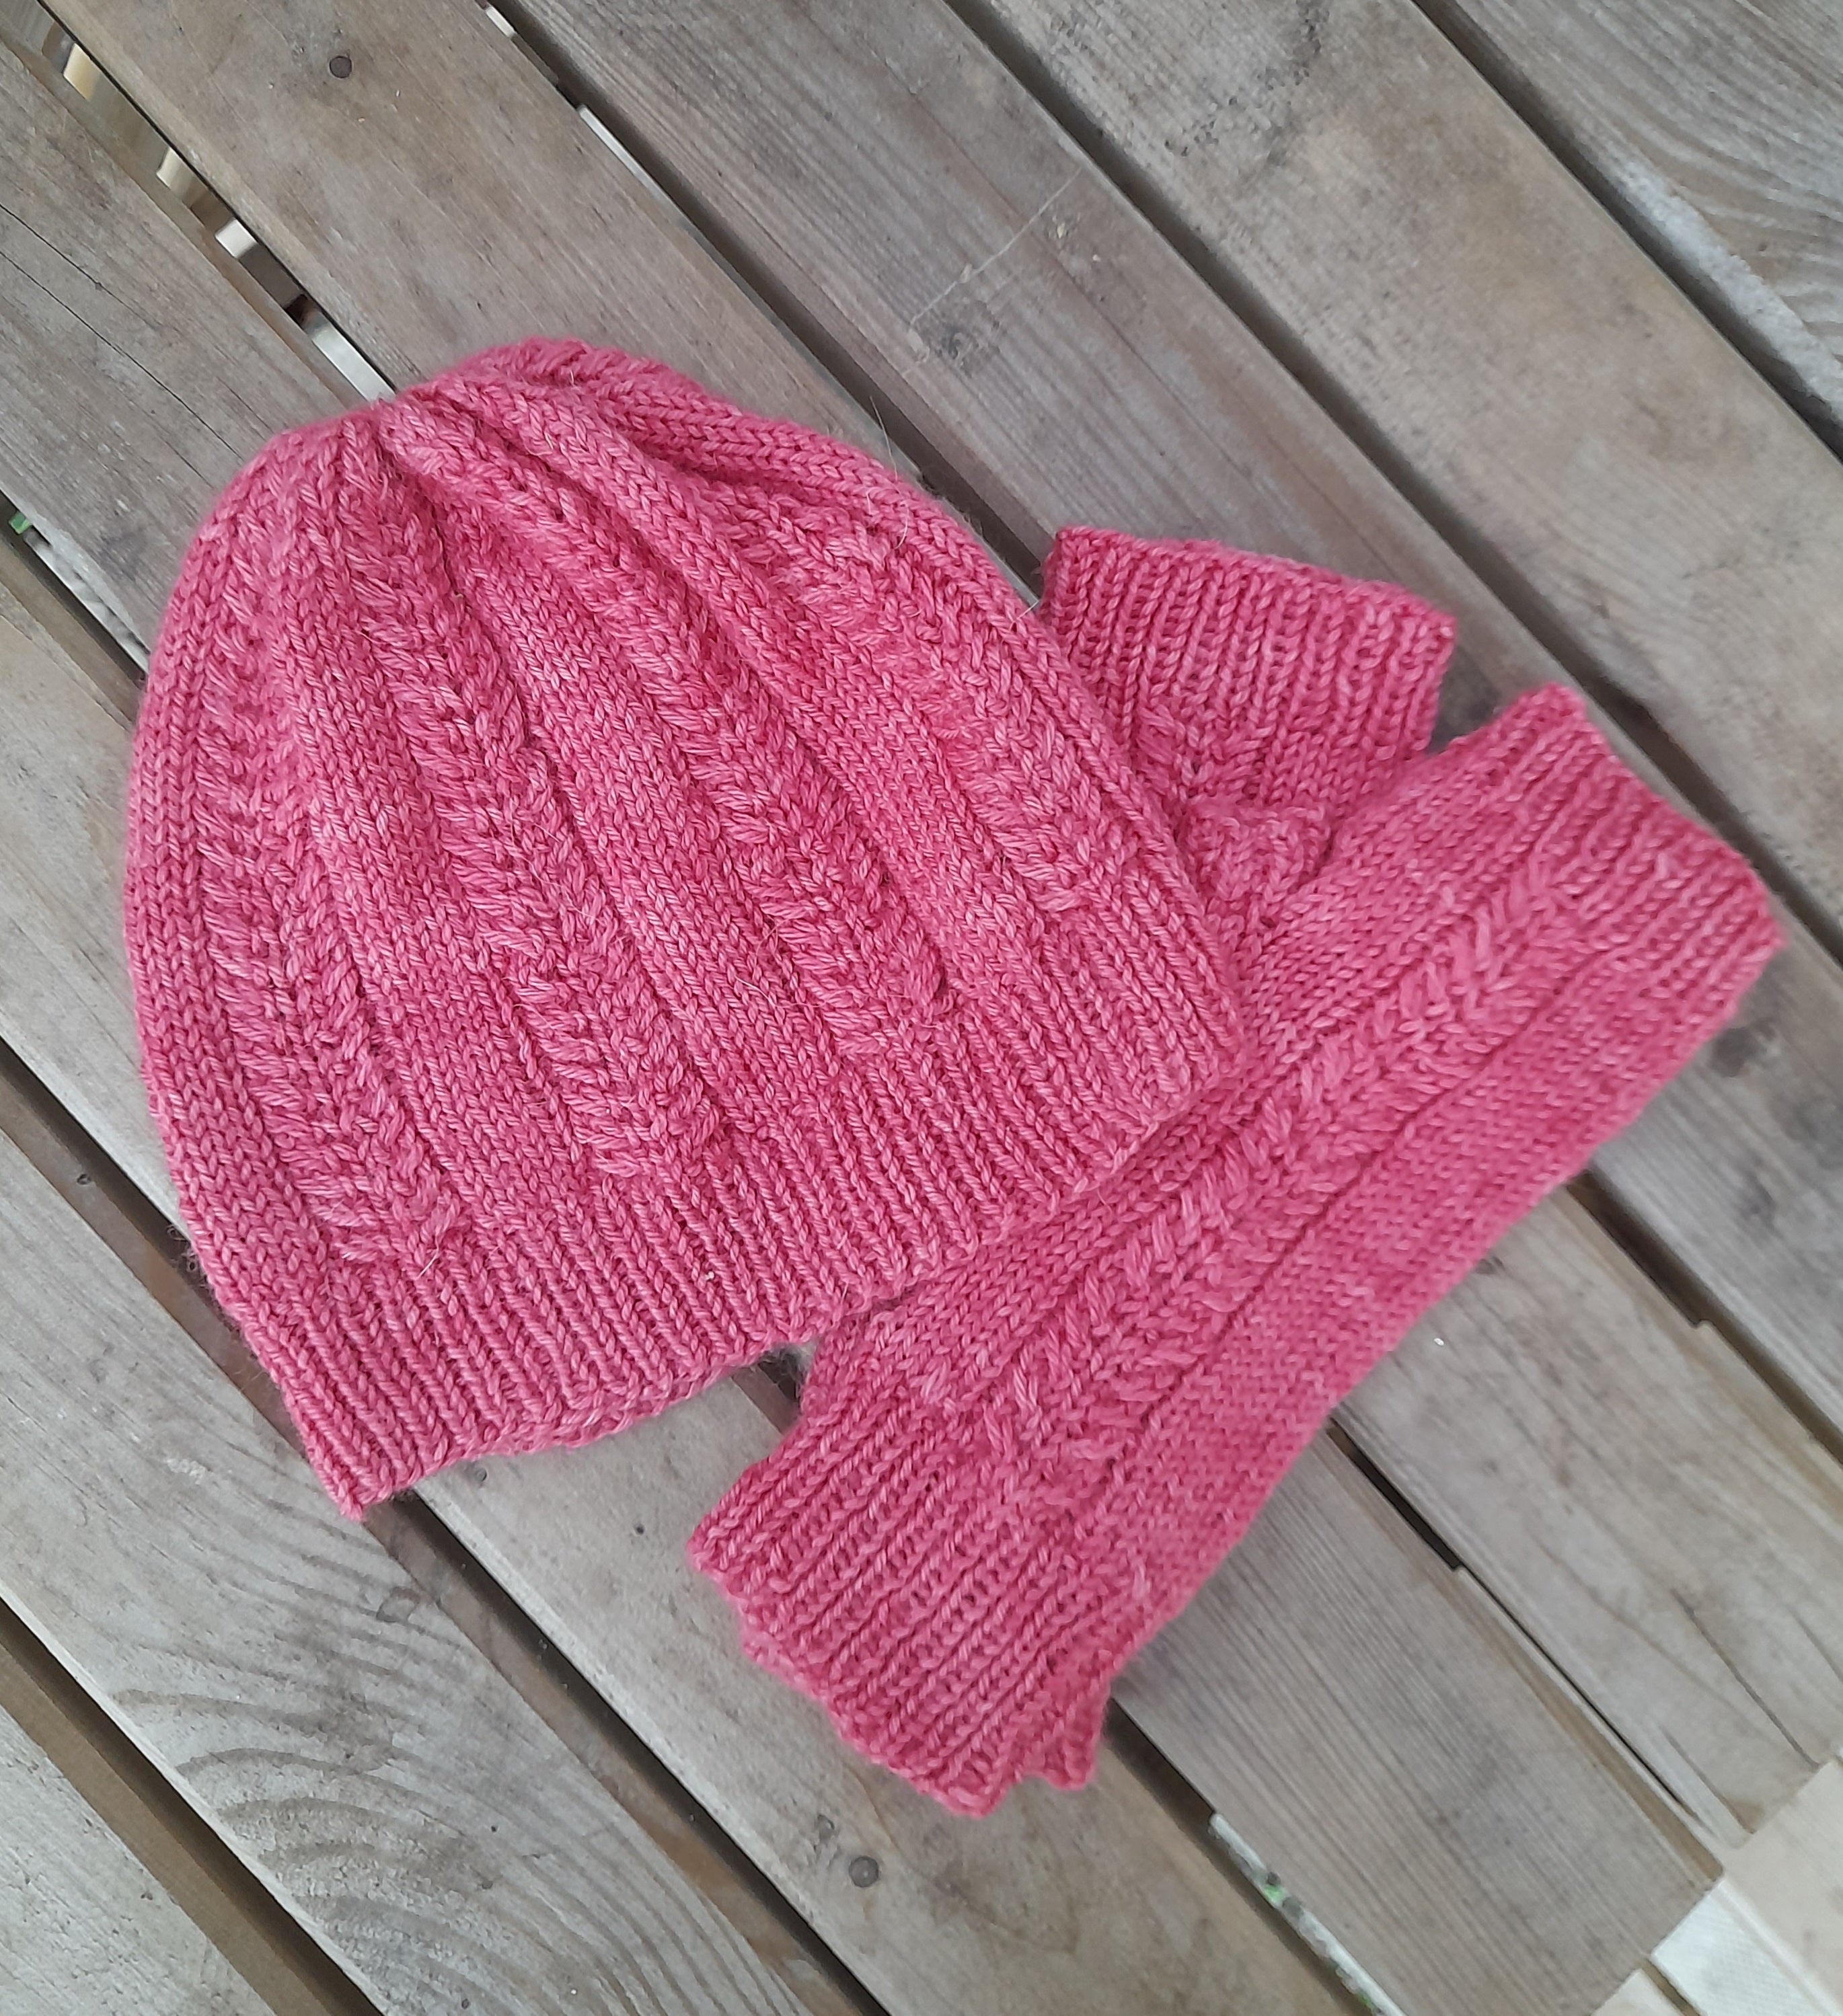 Pink knitted hat and fingerless mitts resting on a wooden bench. Both items feature textured stripe details running vertically along them